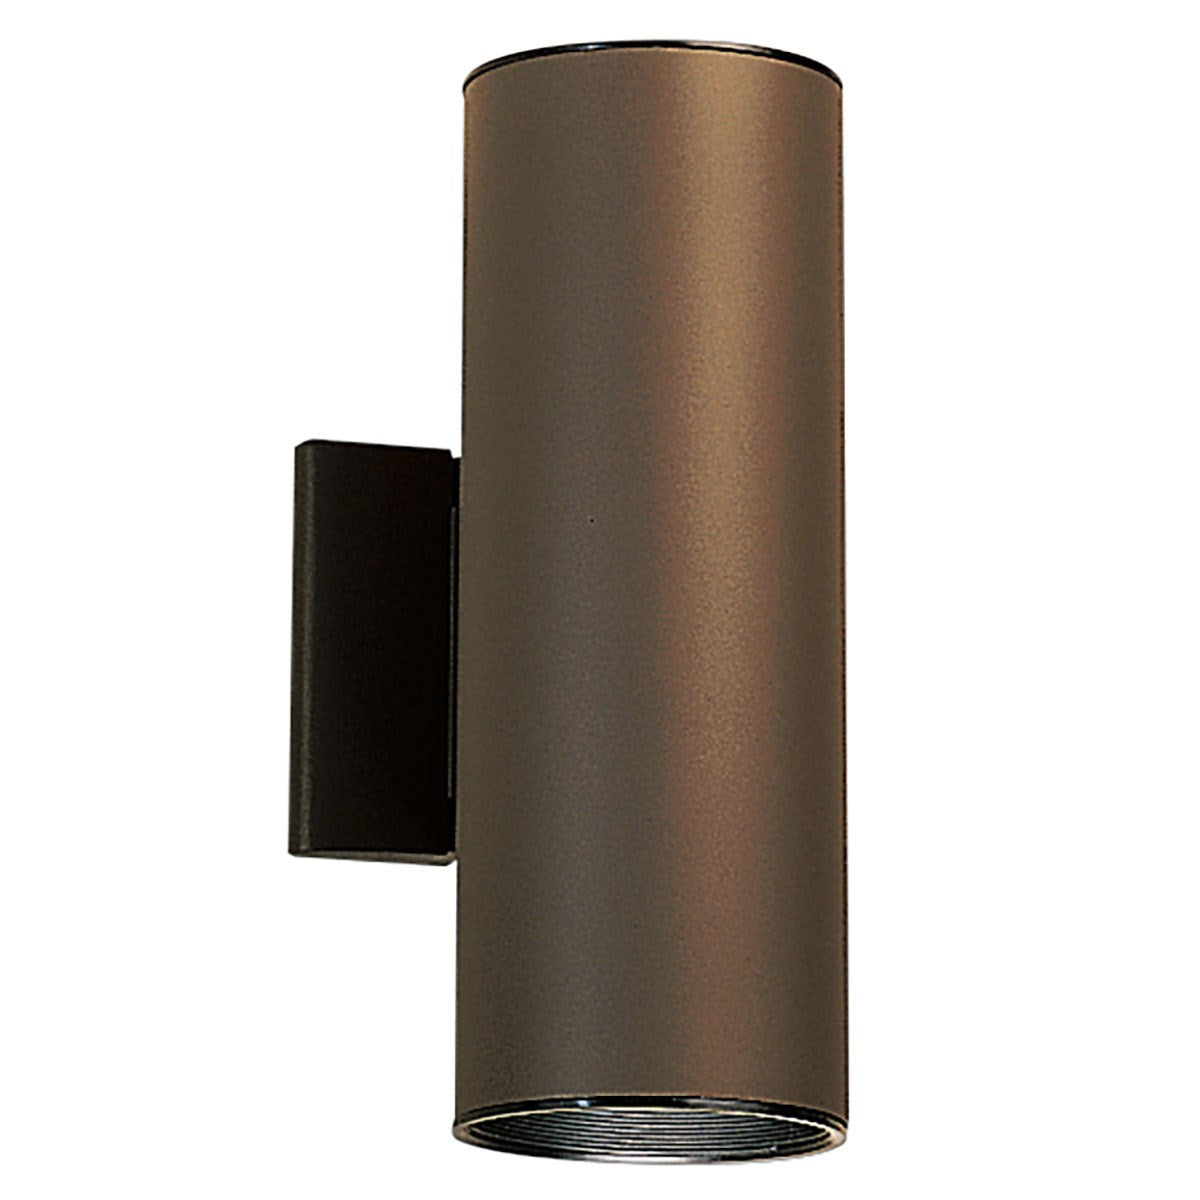 12 Inch  2 Lights Up/Down Cylinder Outdoor Wall Light